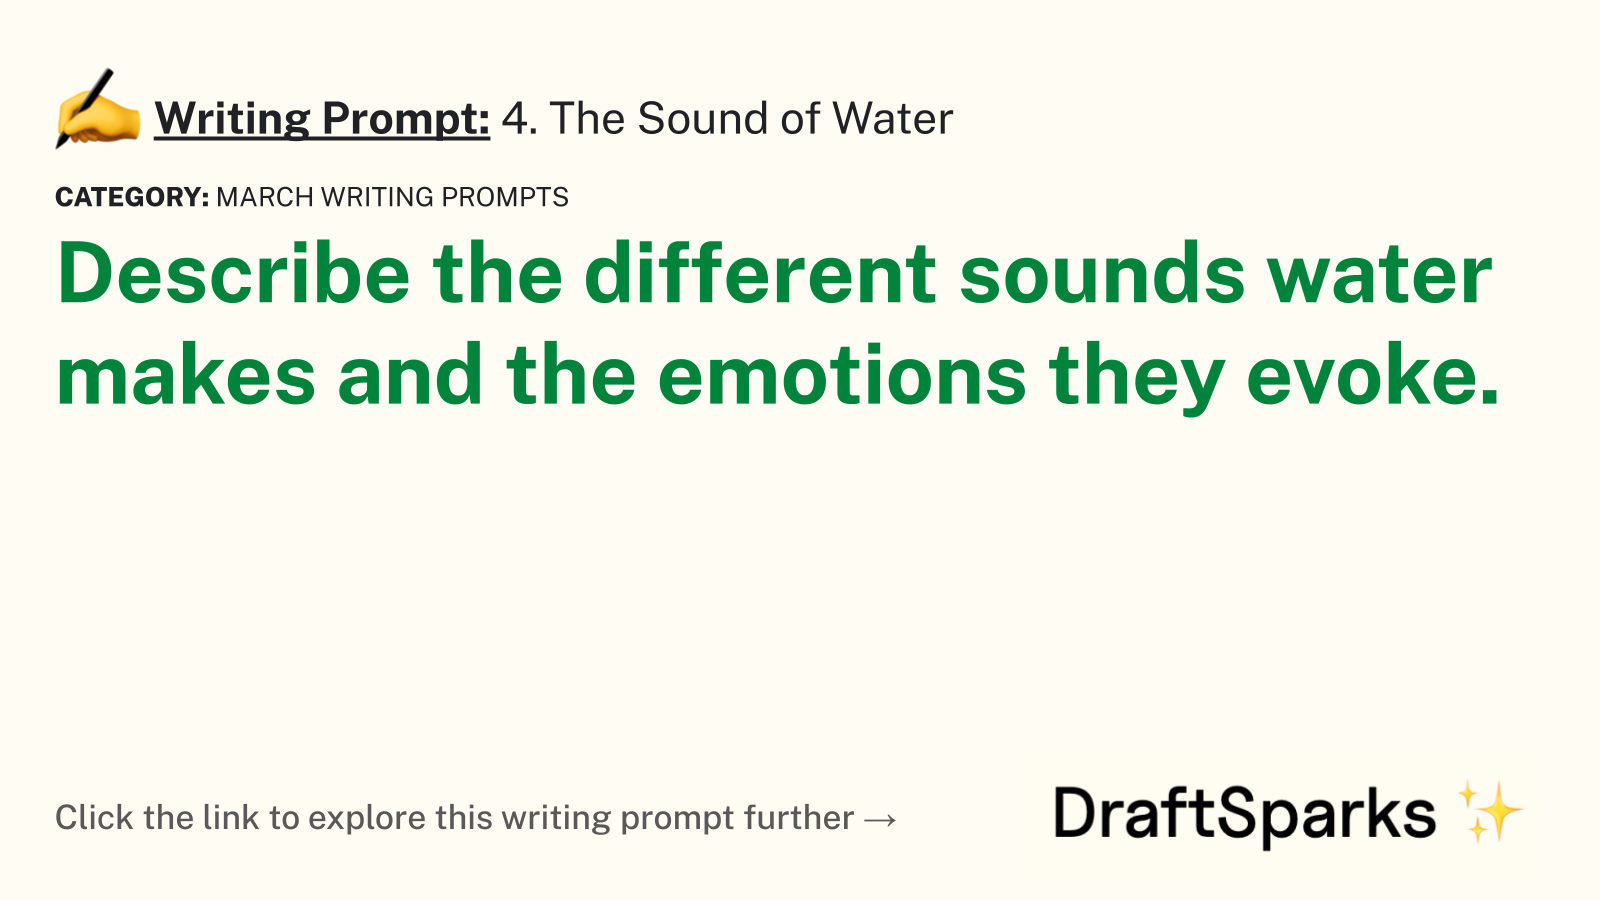 4. The Sound of Water